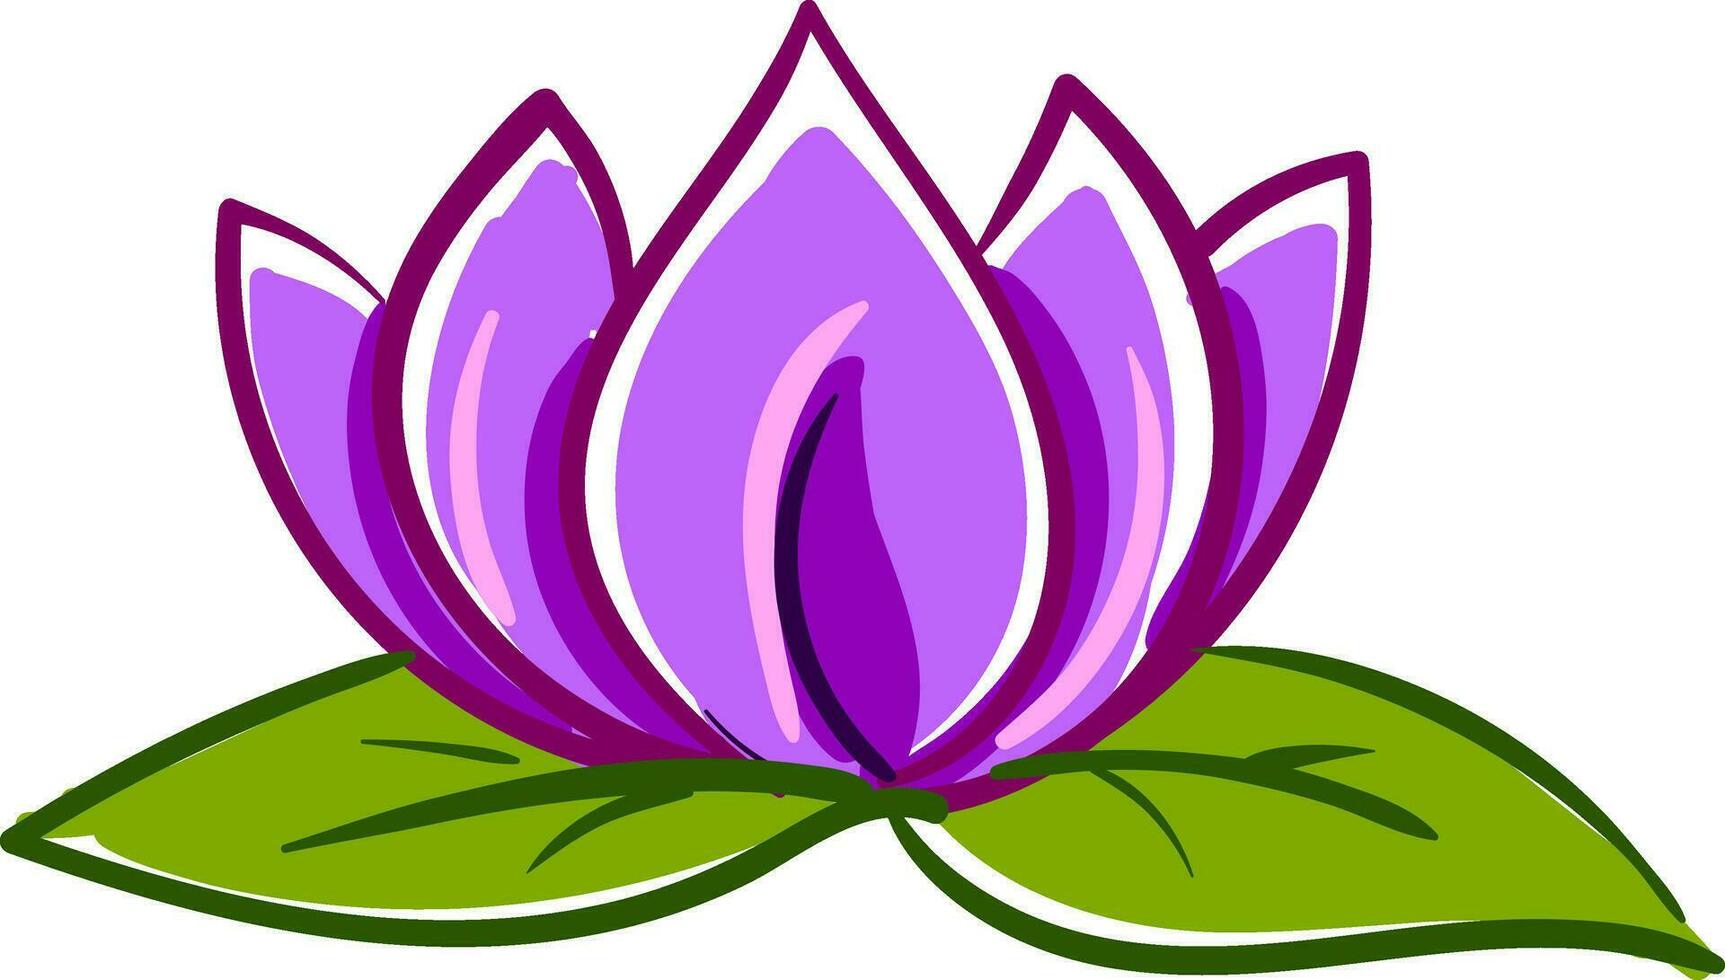 Pink and purple lotus with two green leafes vector illustration on white background